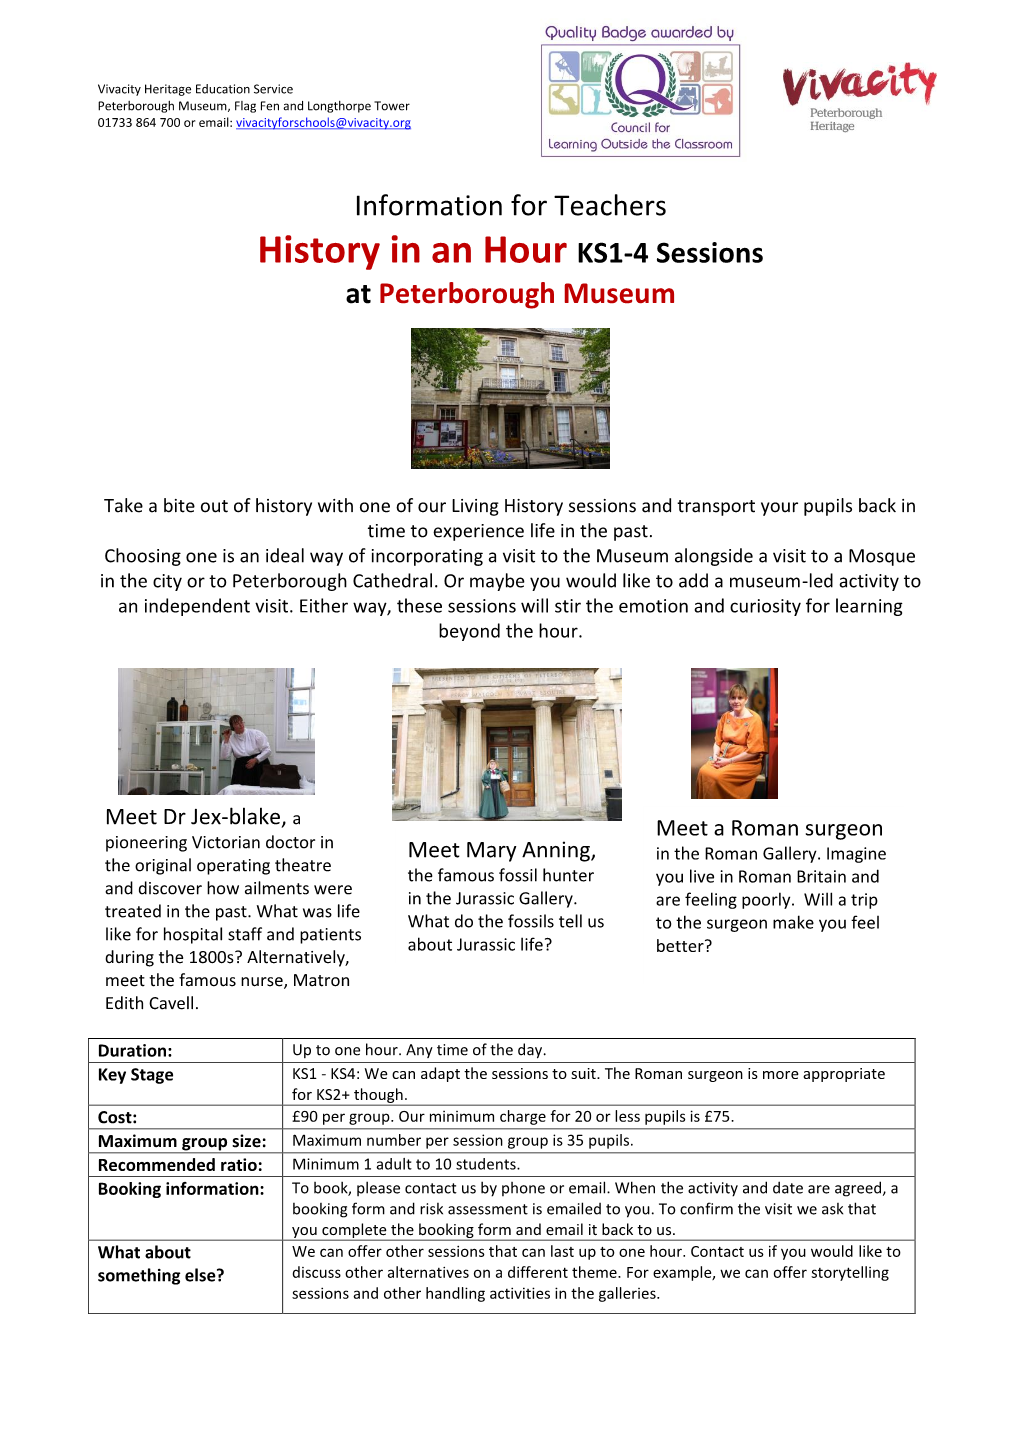 History in an Hour KS1-4 Sessions at Peterborough Museum